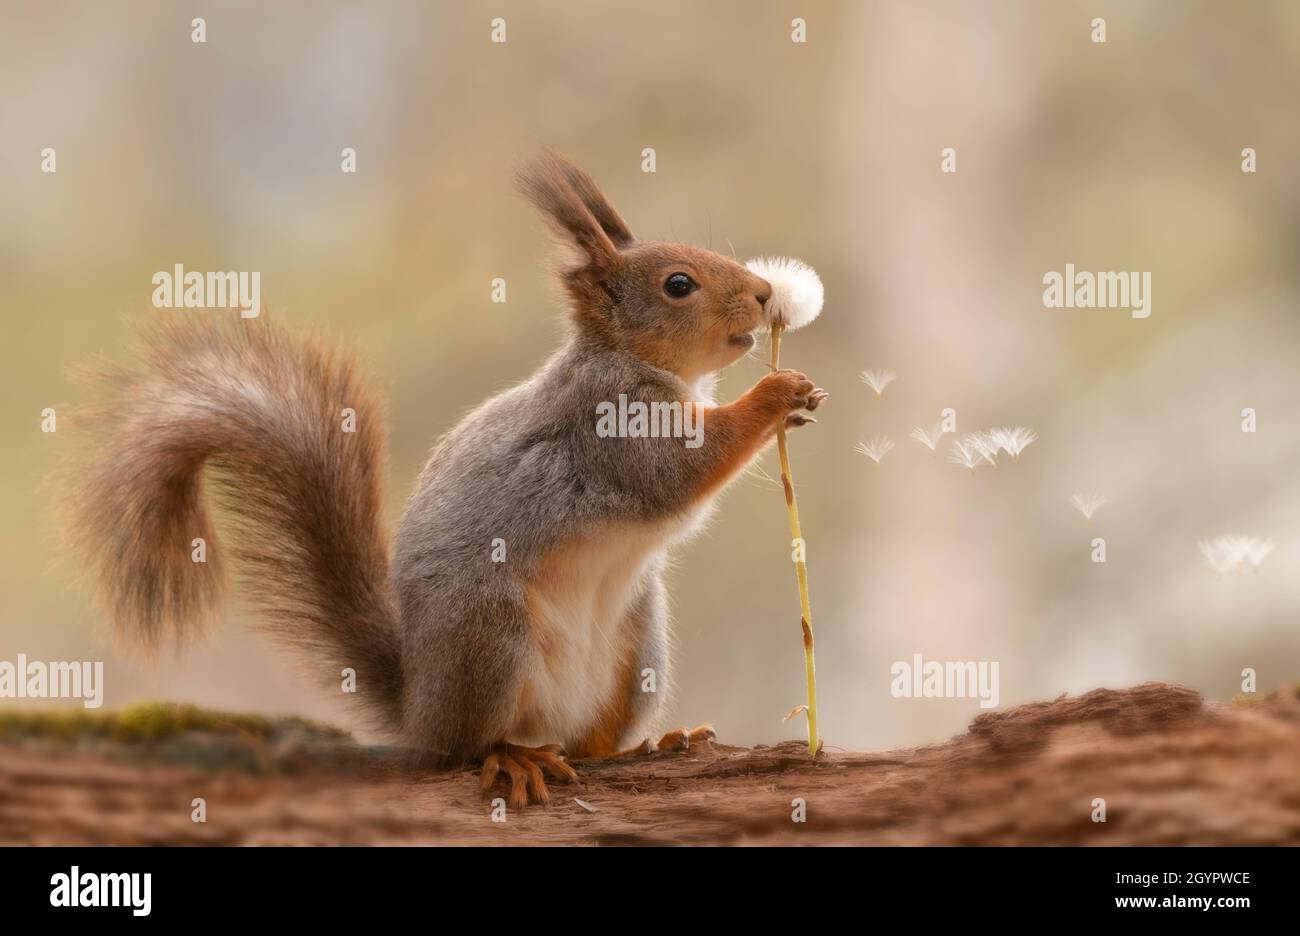 red squirrel is holding a dandelion with flying seeds Stock Photo